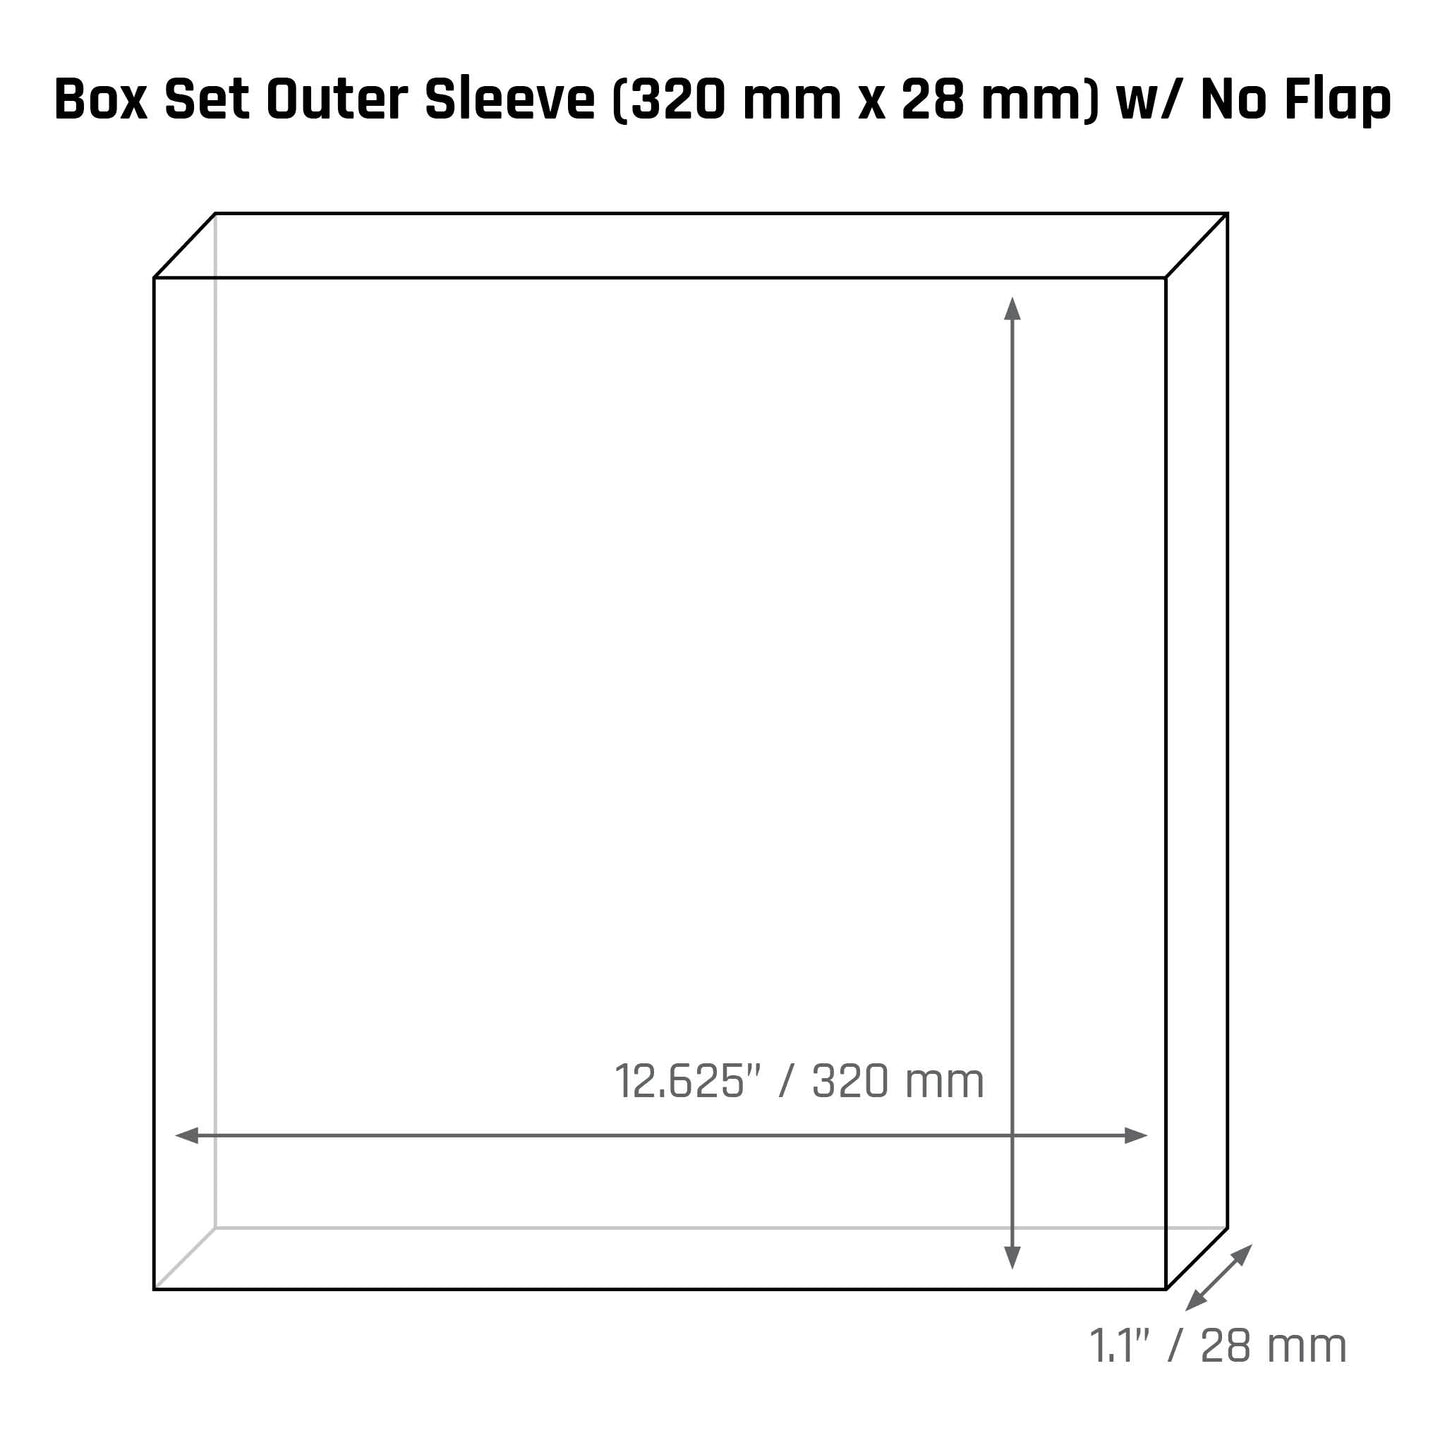 Box Set Outer Sleeve (320 mm x 28 mm) - 3mil